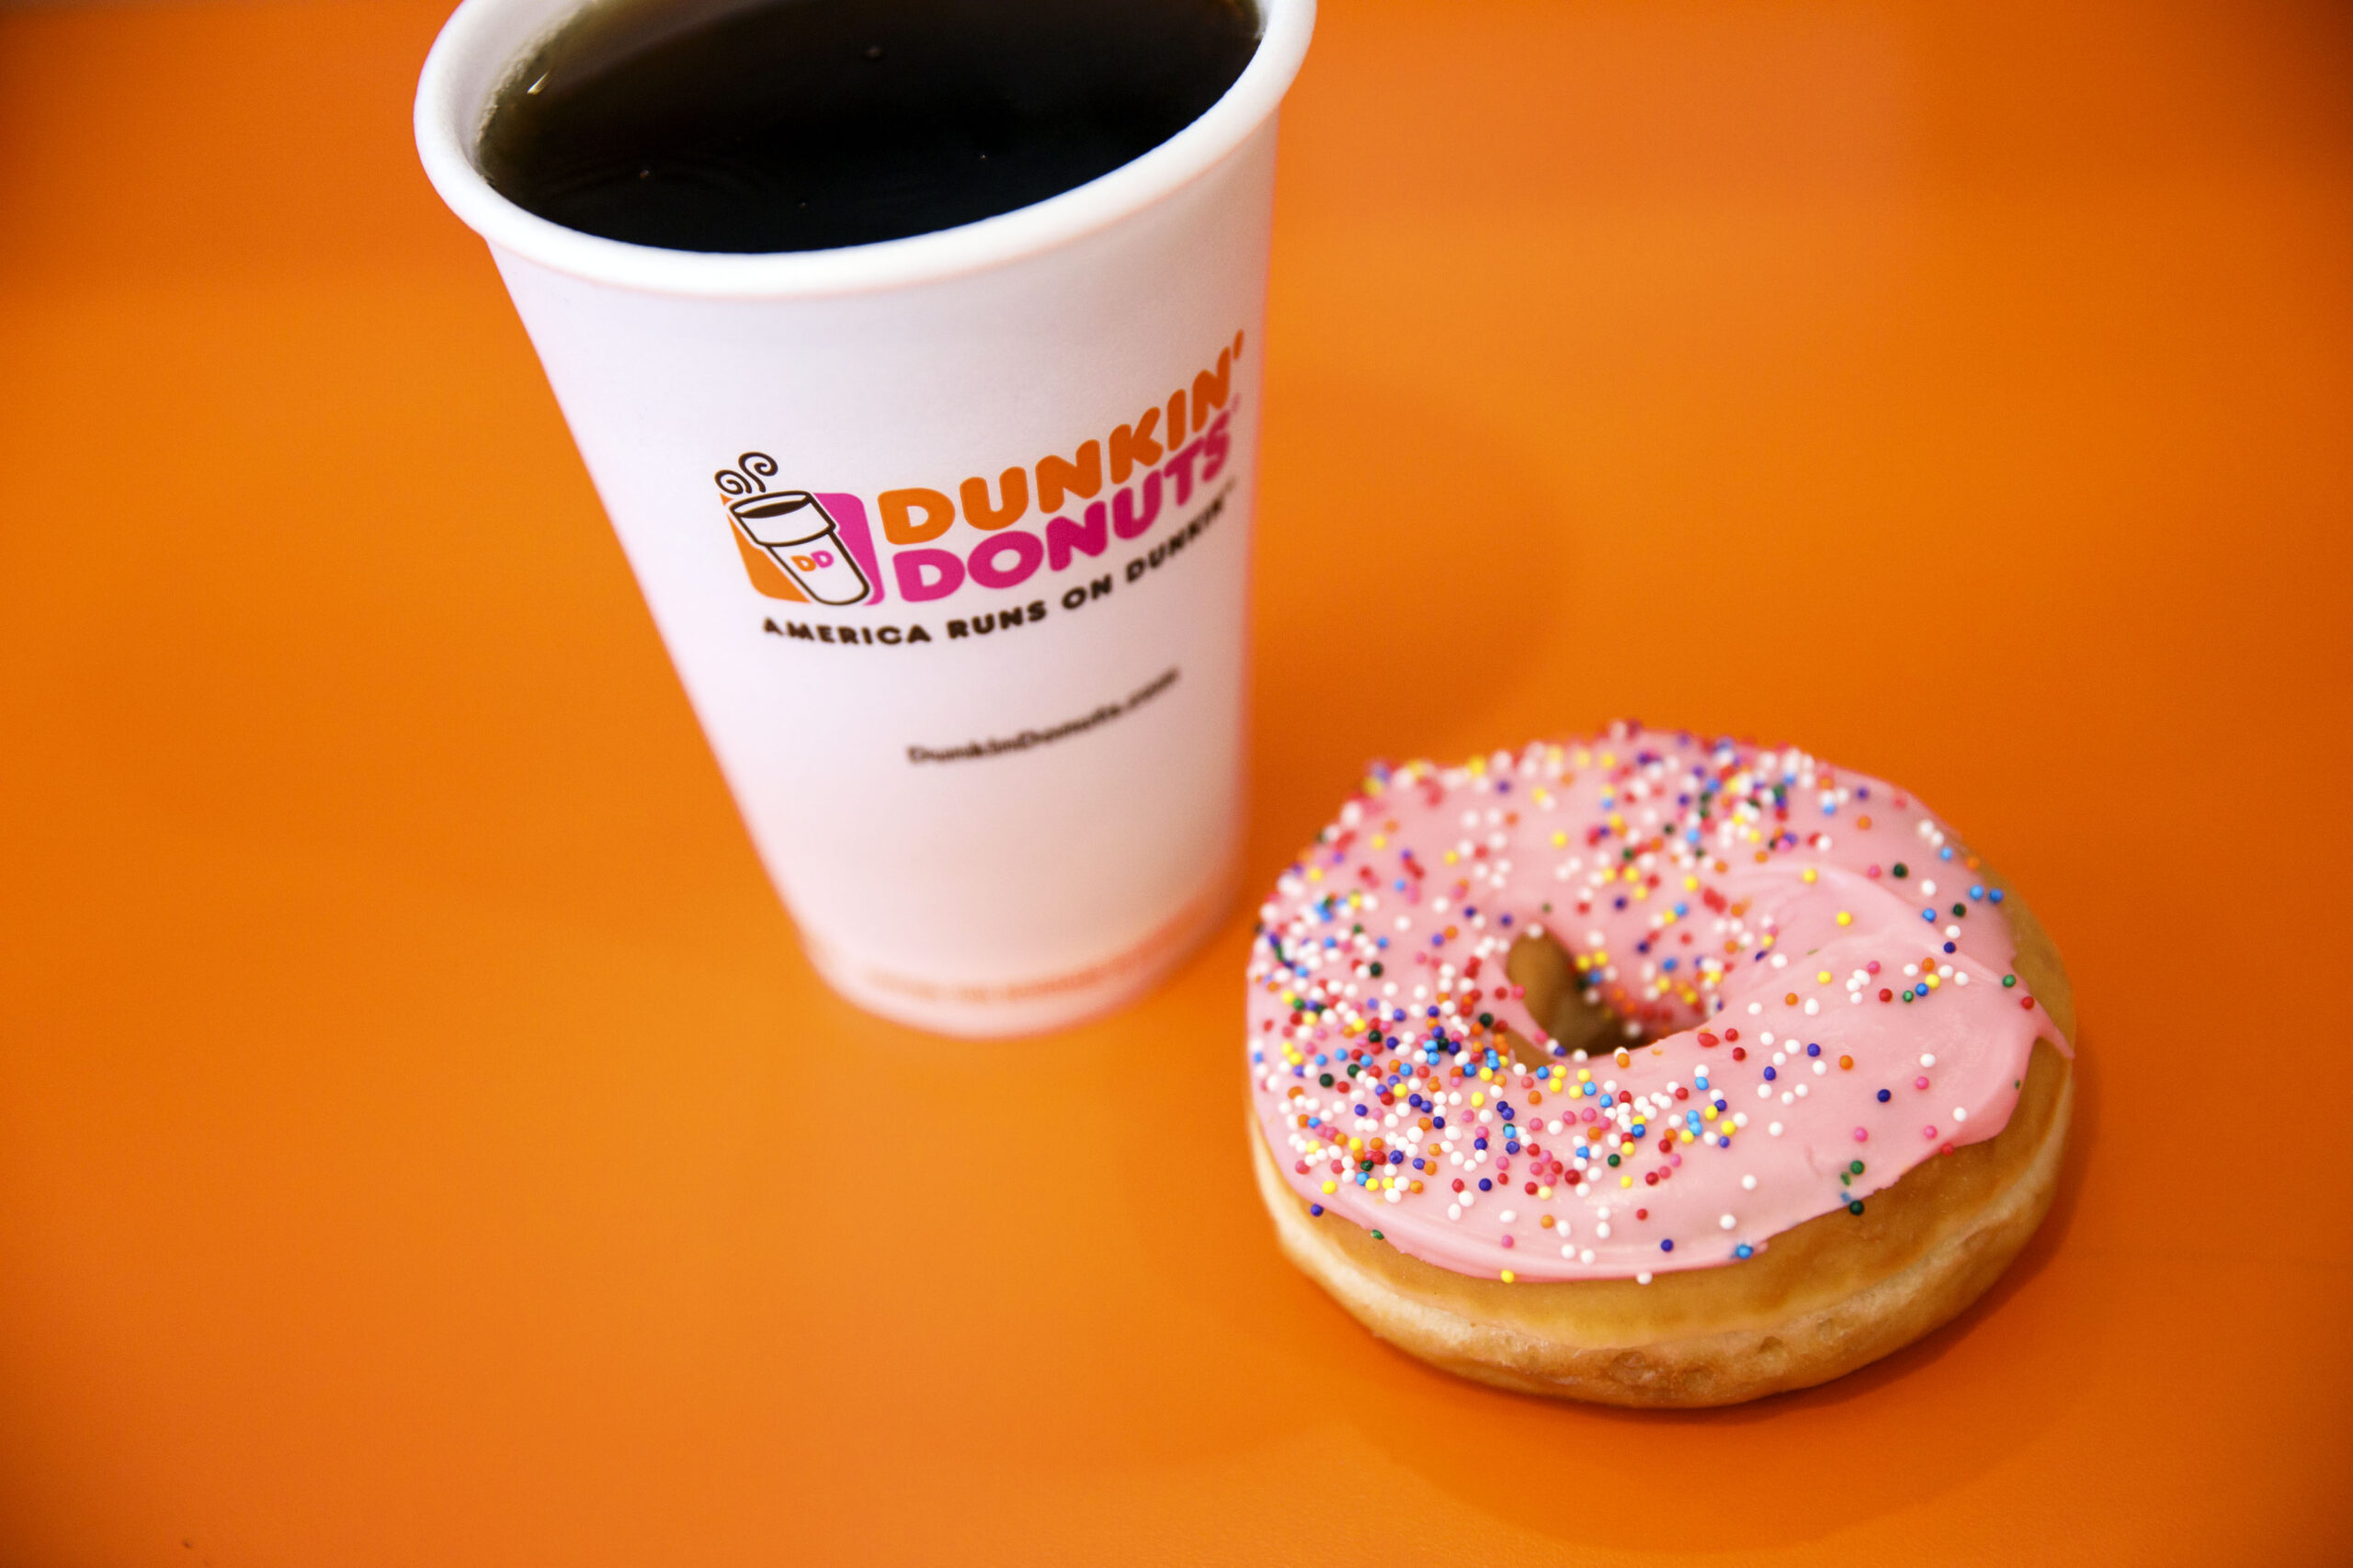 Here’s How You Can Get A Free Cup Of Coffee From Dunkin’ Donuts